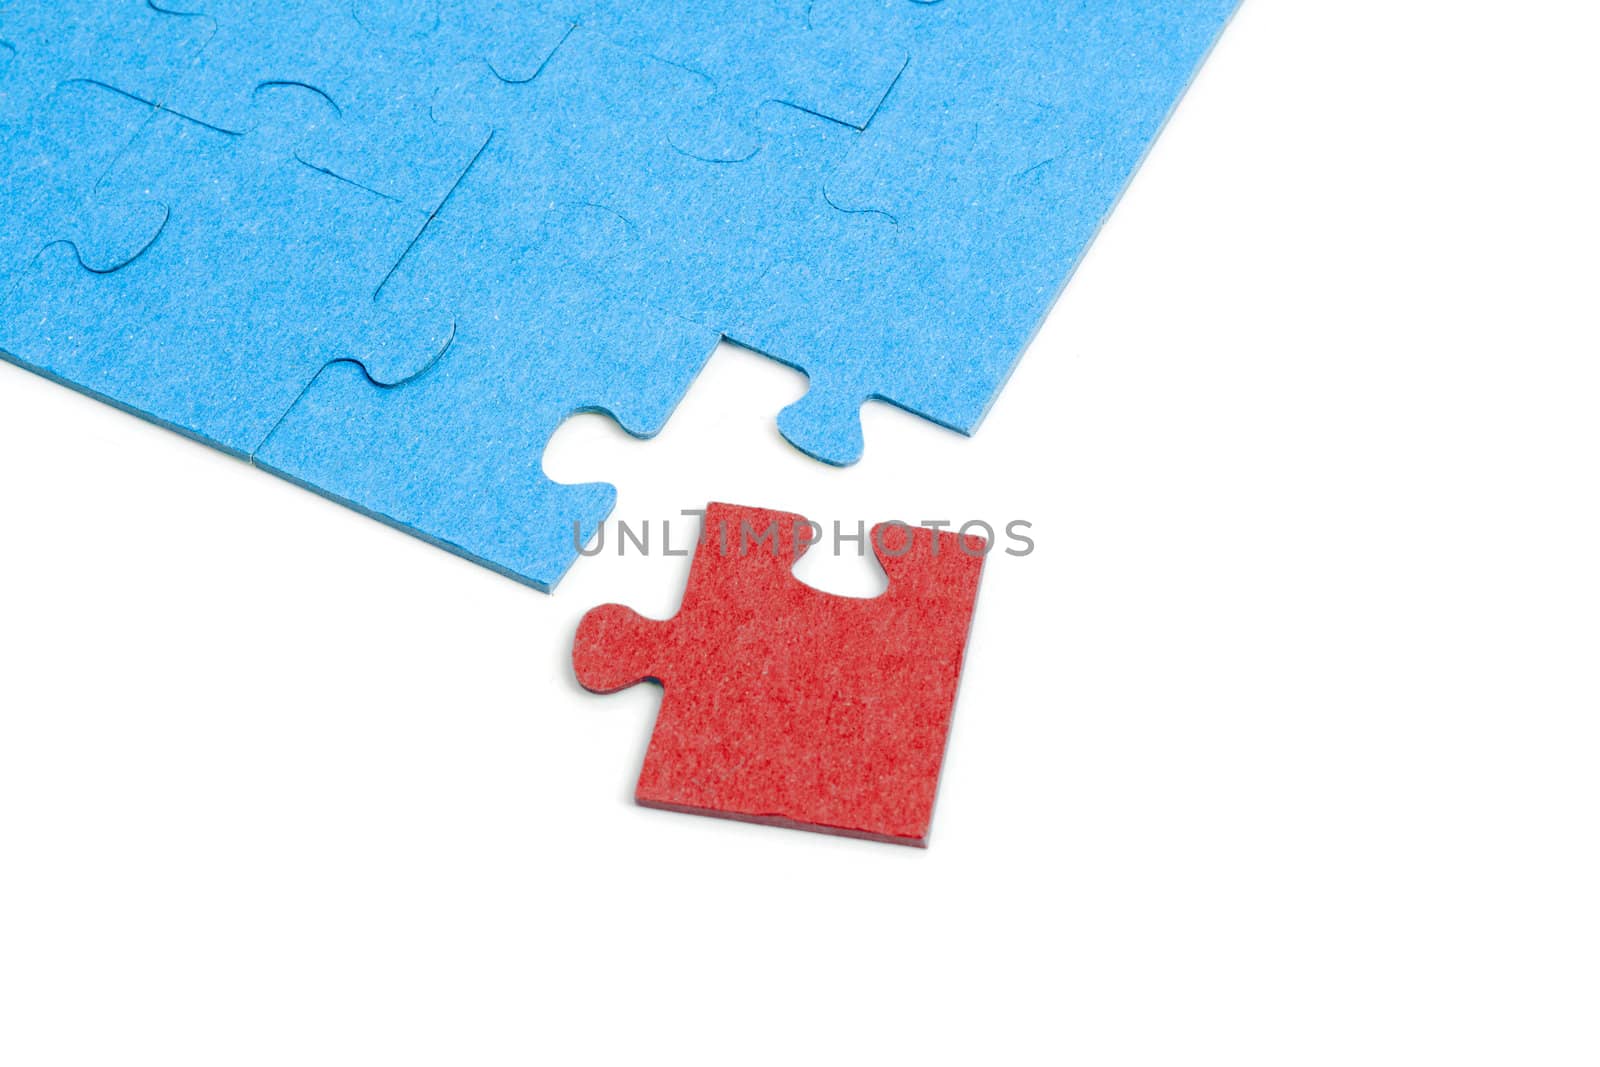 Blue Puzzle with one red jigsaw piece isolated on white background